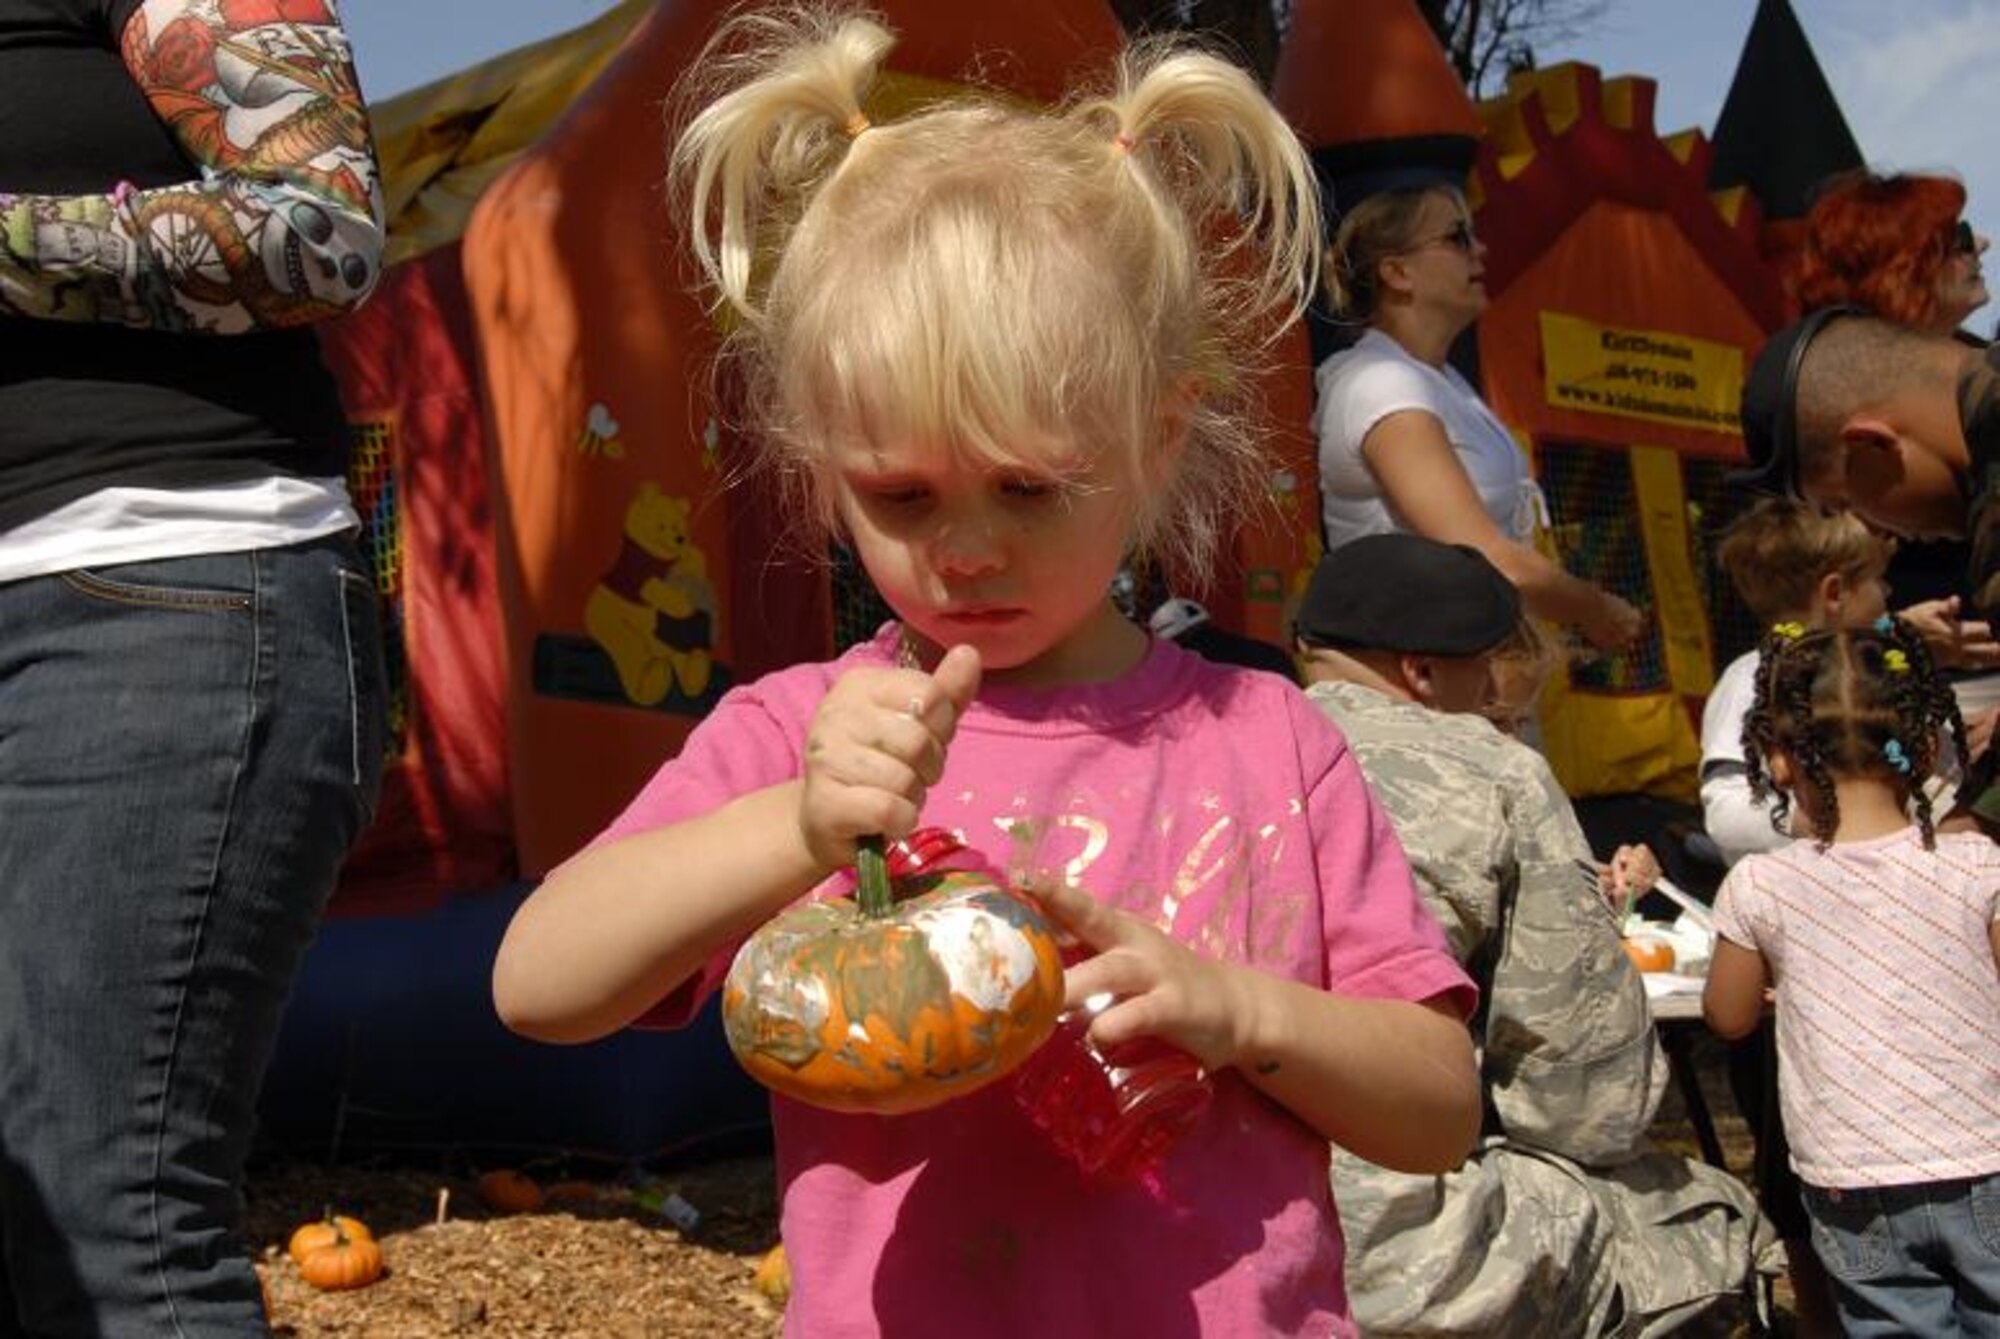 Molly Mae Theodoroff, daughter of Master Sgt. Timothy Theodoroff, a satellite technician with the 129th Communications Flight, takes a time out from the bounce houses to admire her arts and crafts pumpkin at the 129th Rescue Wing’s annual Family Day Picnic hosted Oct. 3 at Moffett Federal Airfield, Calif. (Air National Guard photo by Tech. Sgt. Ray Aquino)